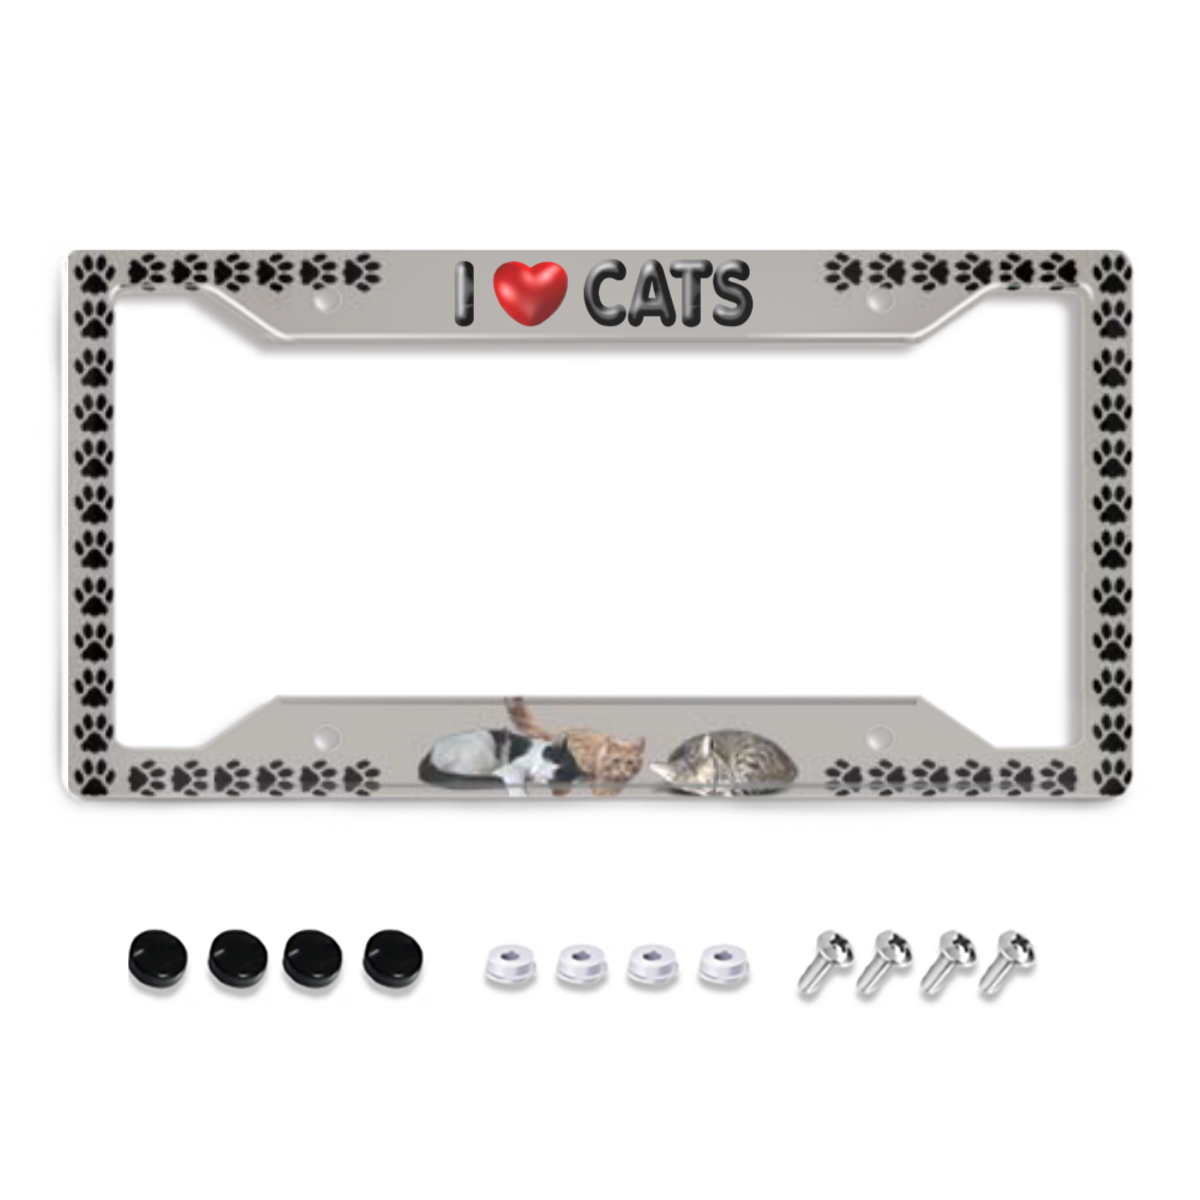 I love Cats License Plate Frame